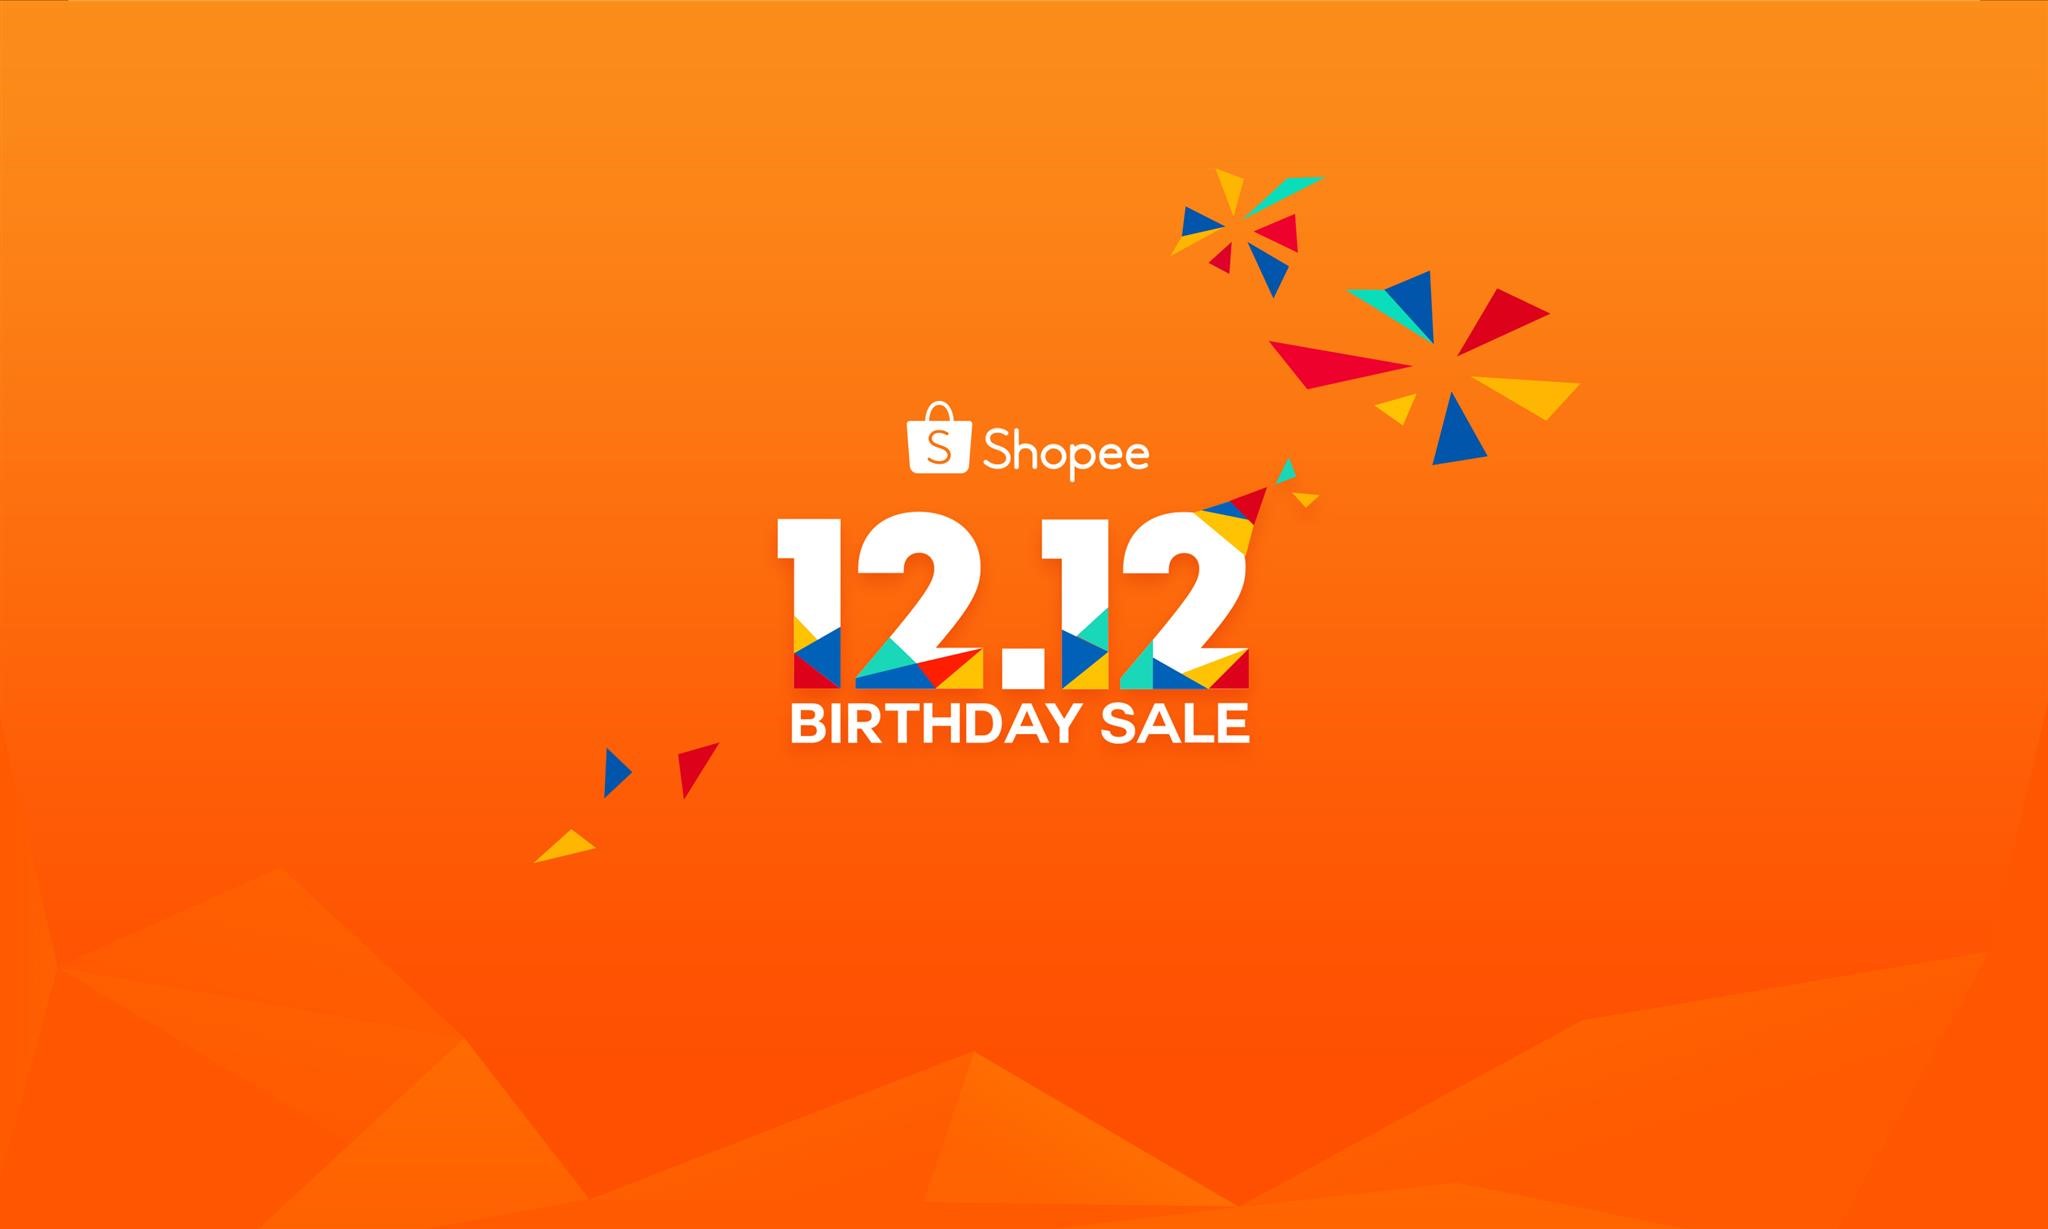 Shopee wraps up a record-breaking 2018 with over 12 million orders on 12.12 1